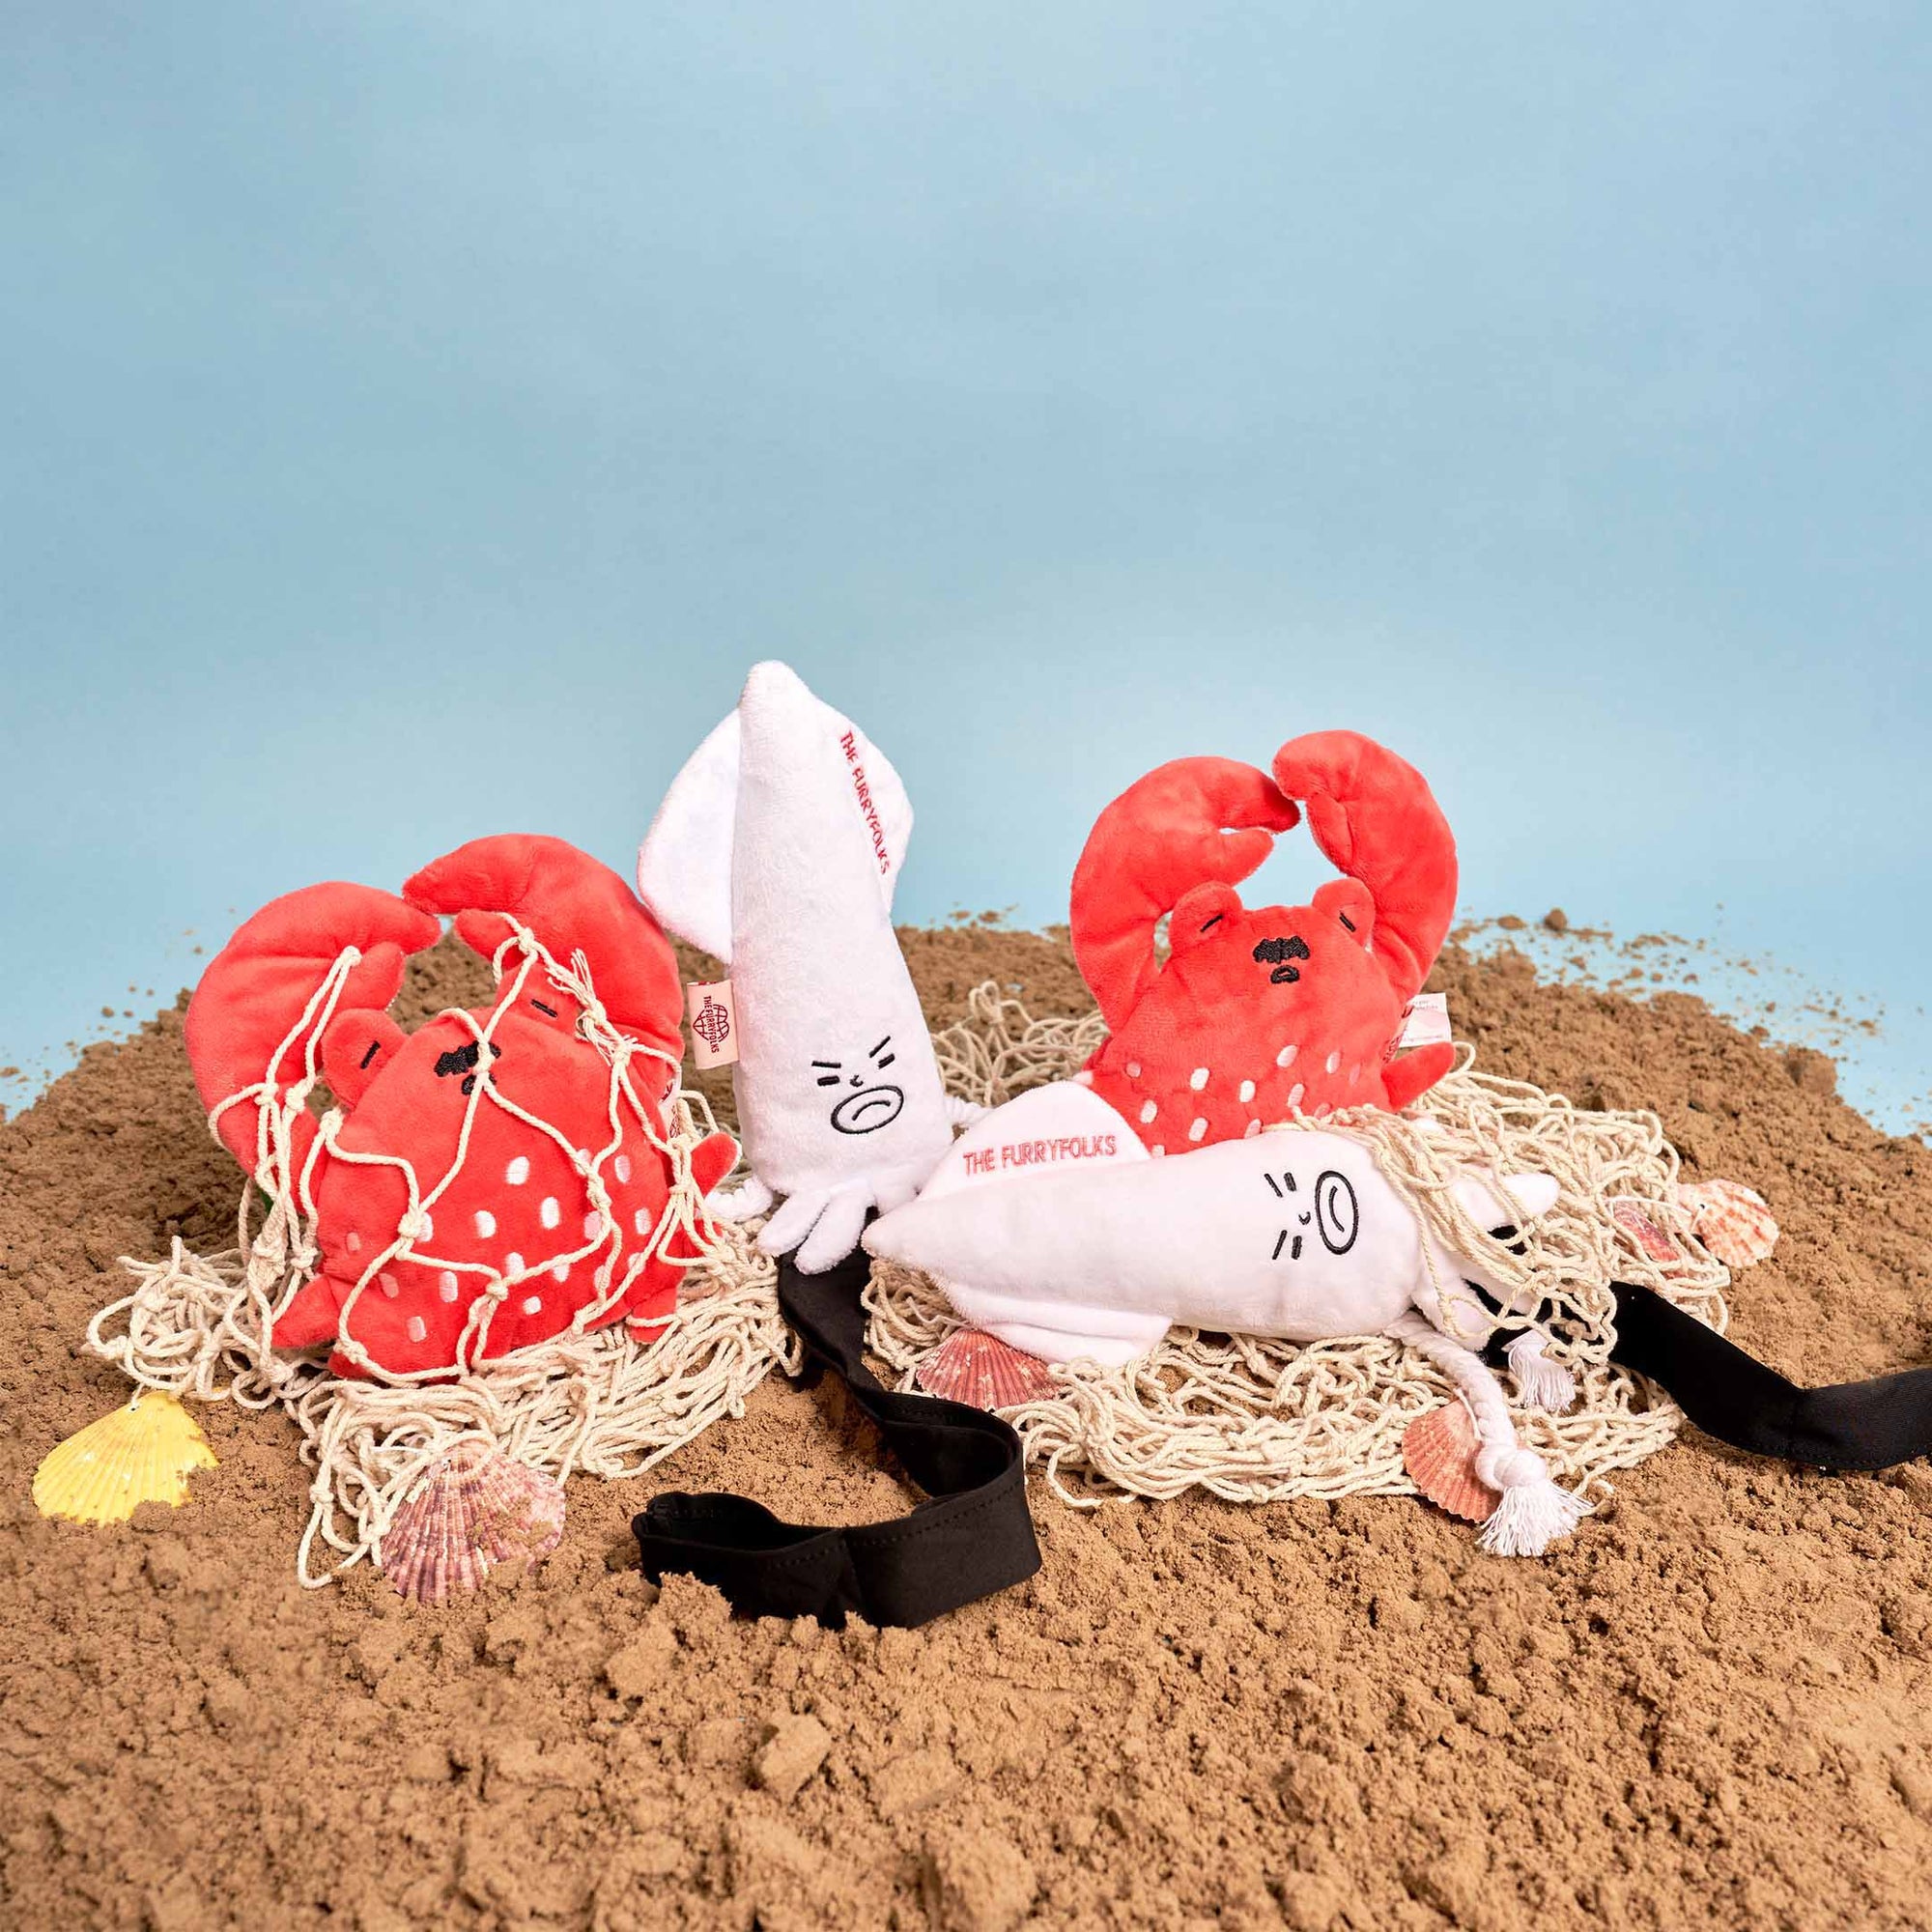 The image showcases a collection of plush toys on a sandy surface, arranged to create a playful, beach-themed setting. The toys include two red crab plushies and a white plush marked with "THE FURRYFOLKS," possibly the brand name. Seashells and a fishing net contribute to the nautical ambiance. This arrangement could be for product promotion or a creative display concept.